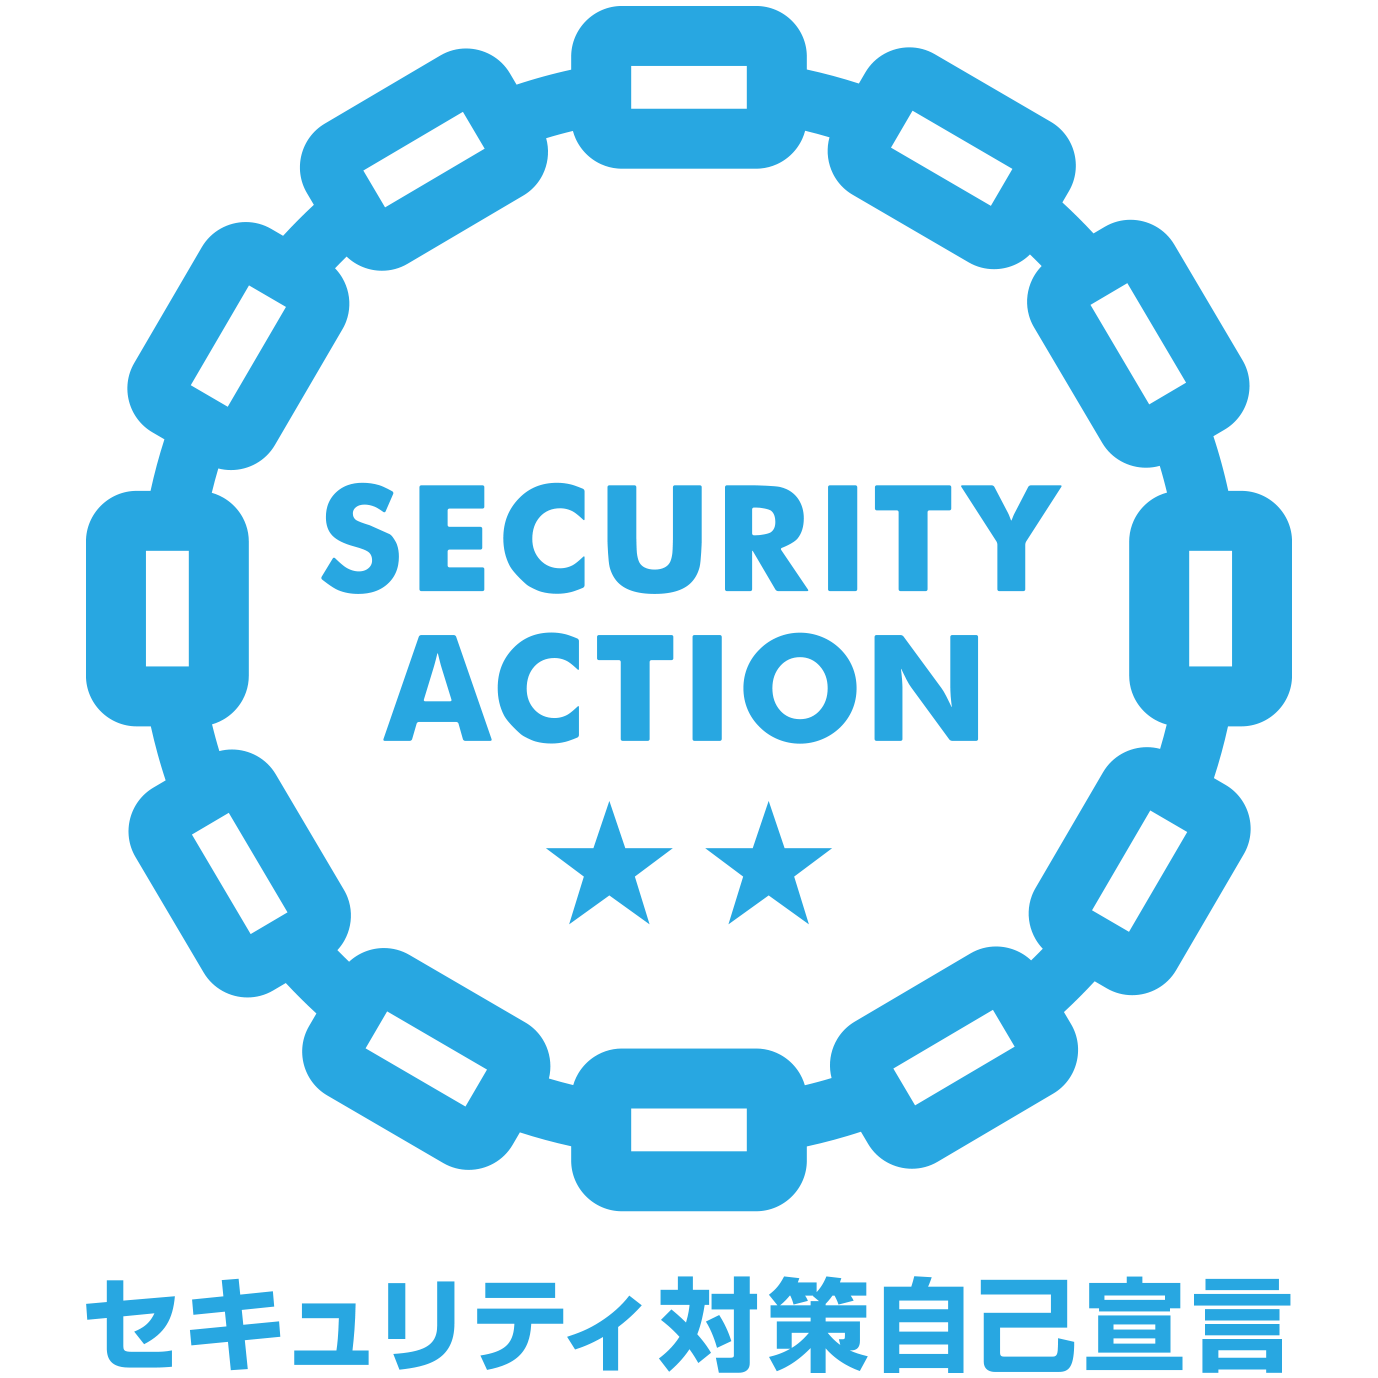 「SECURITY ACTION」二つ星